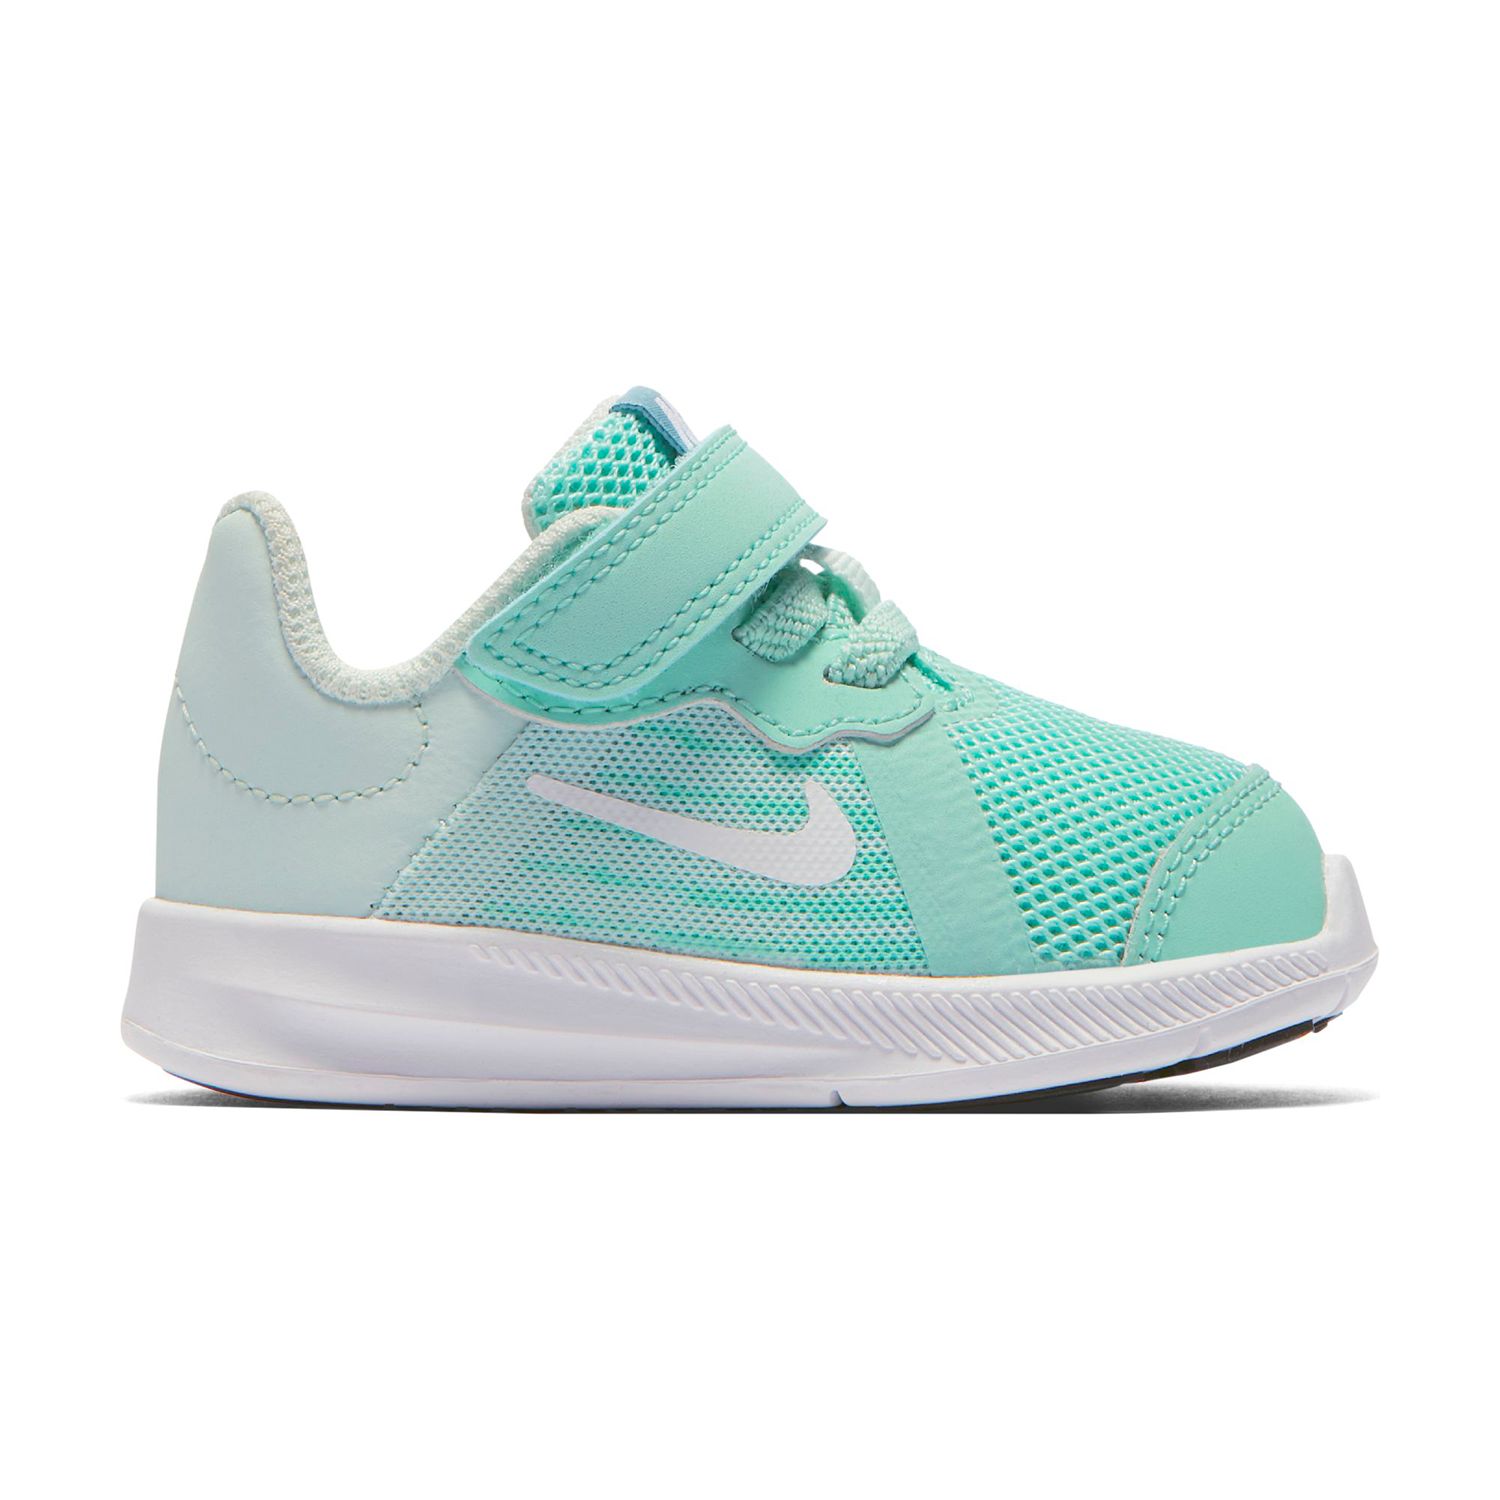 Nike Downshifter 8 Toddler Girls' Sneakers